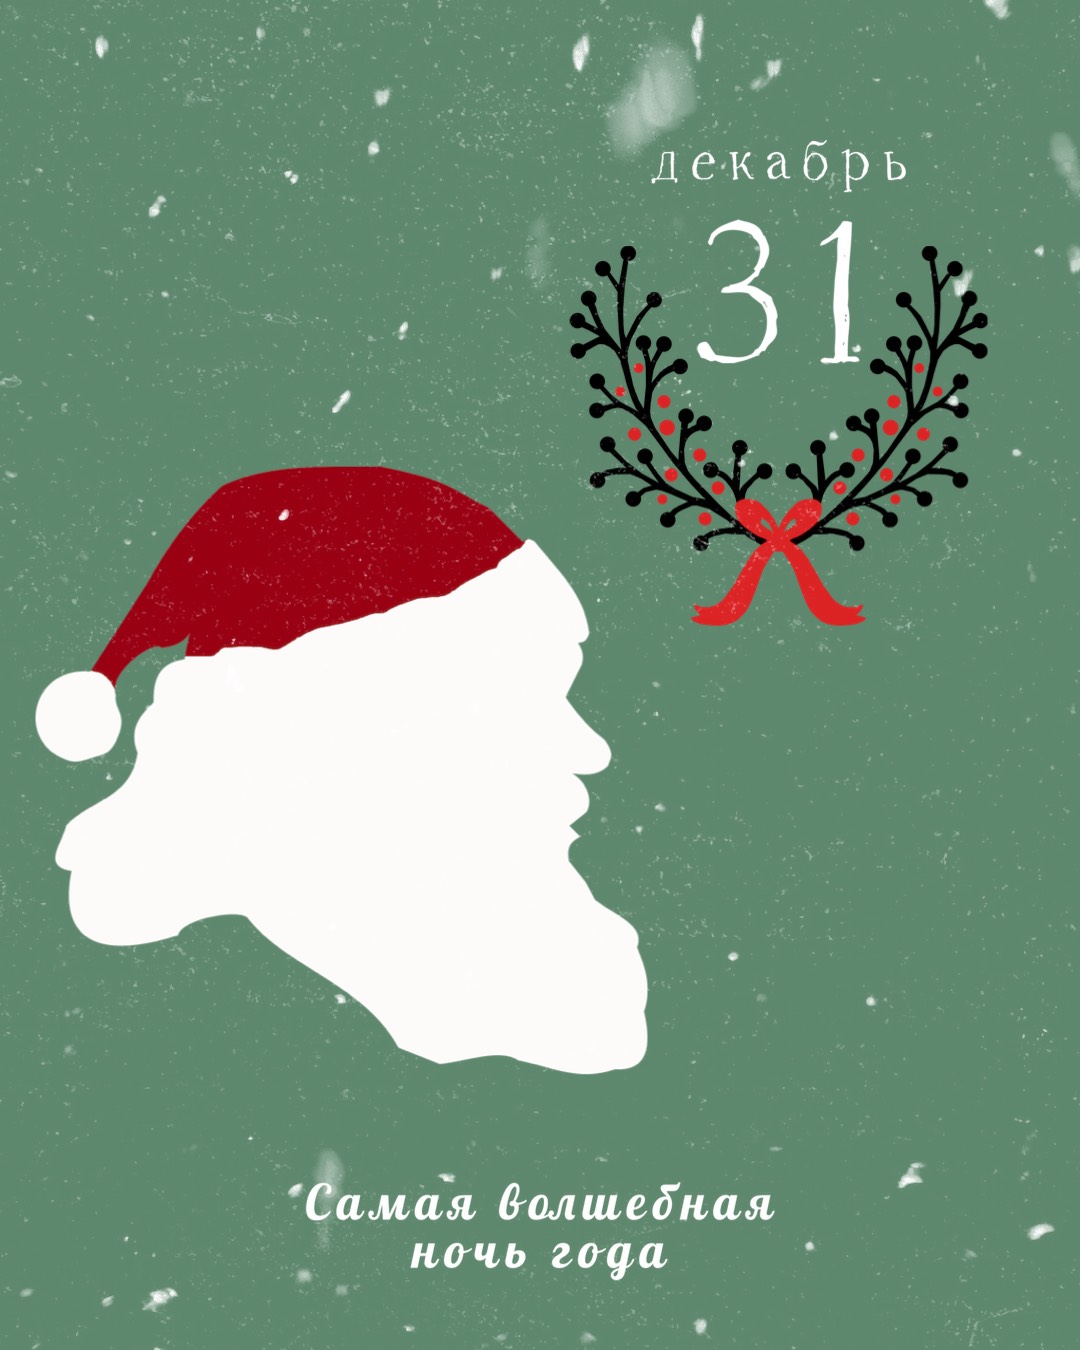 A Christmas Card With A Silhouette Of A Man Wearing A Santa Hat Template